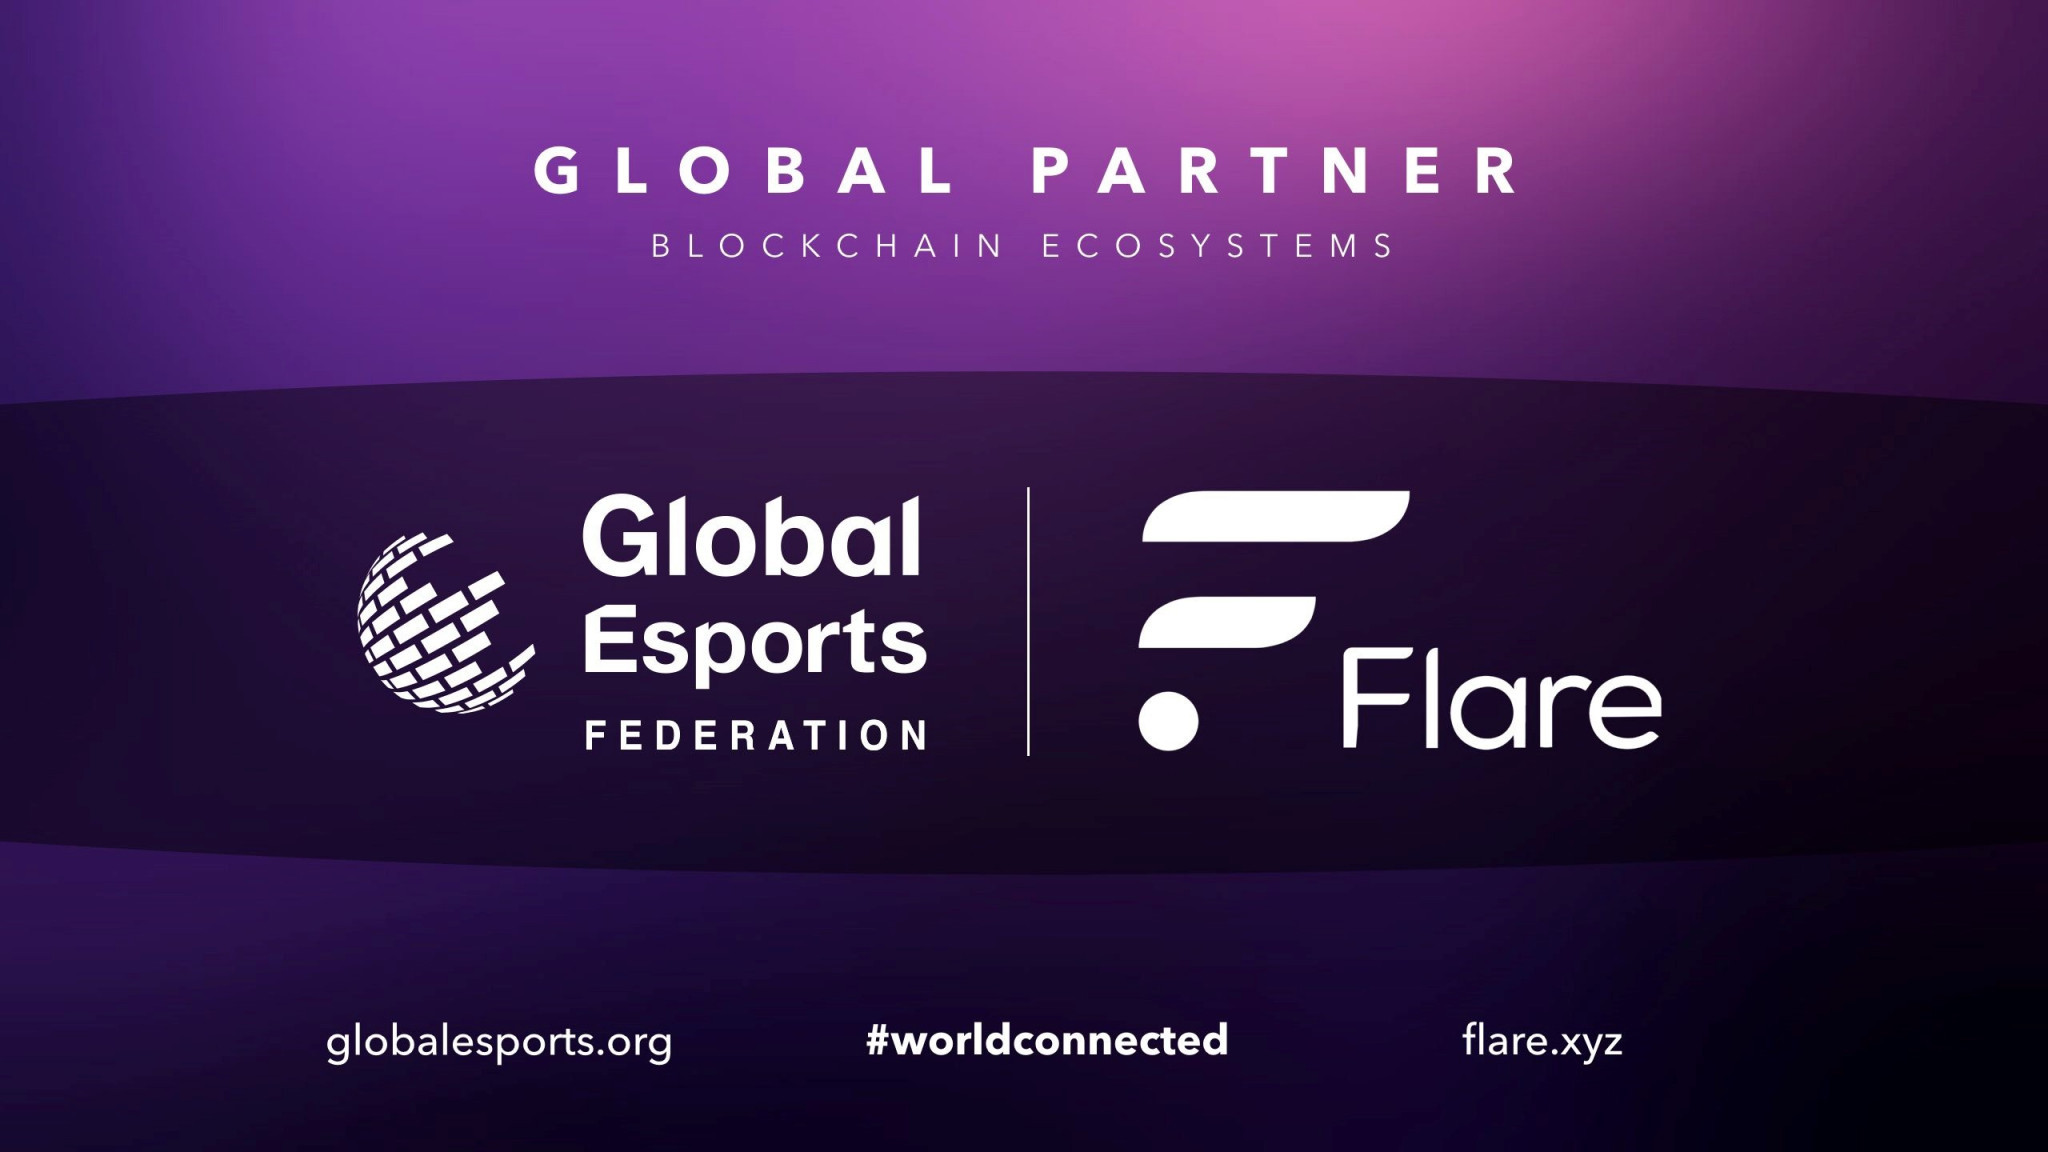 The Global Esports Federation has established over 115 global partnerships, it is claimed ©Global Esports Federation